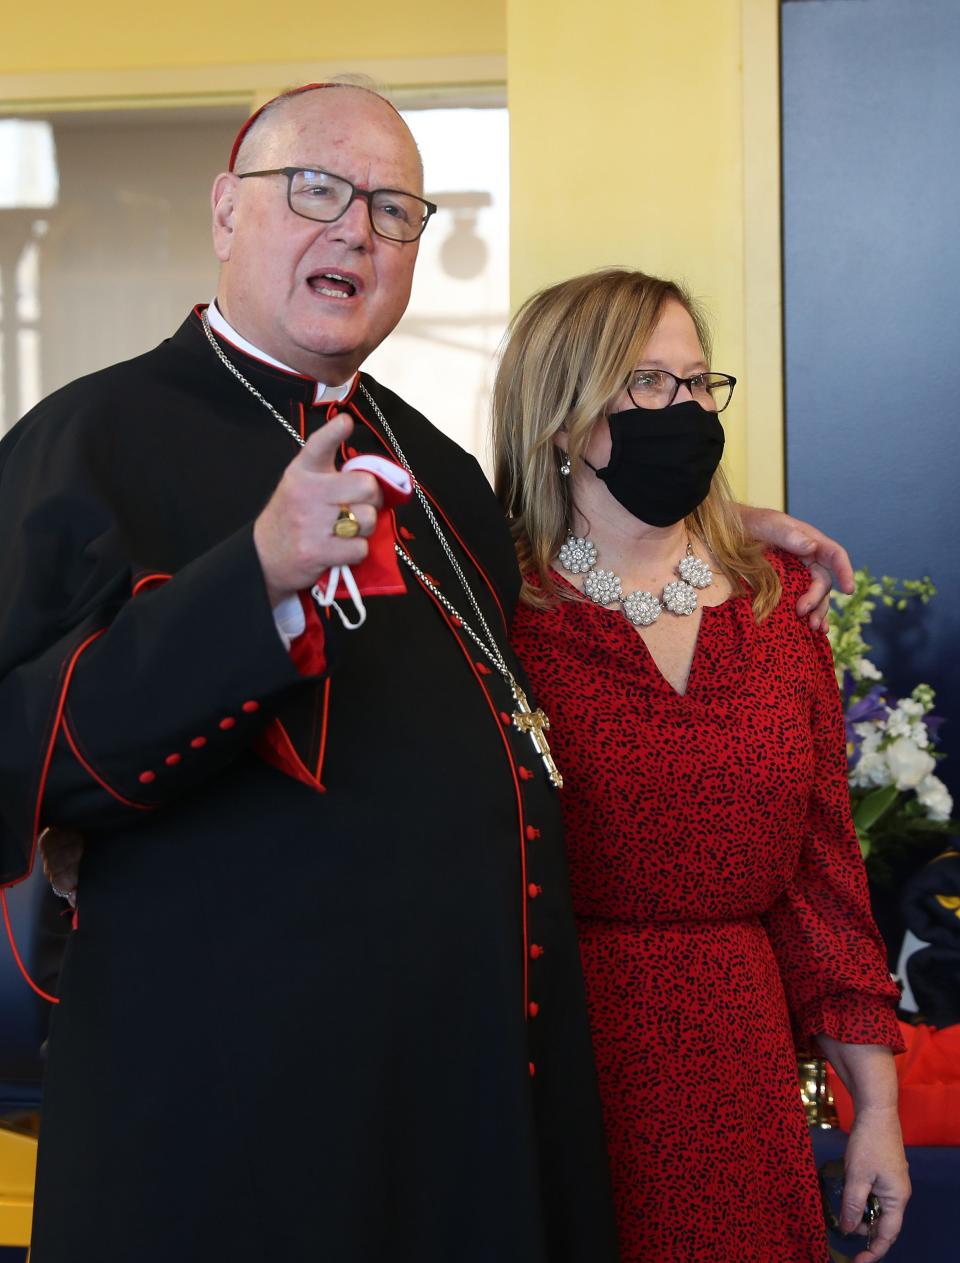 Our Lady of Lourdes president Catherine Merryman, shown here with Cardinal Timothy Dolan in the new athletic facility at Our Lady of Lourdes High School in Poughkeepsie Feb. 10, 2021, has been meeting with Ossining administrators and family members of a player who was the target of a racist shout in a Section 1 girls basketball playoff game on Feb. 26, 2022.